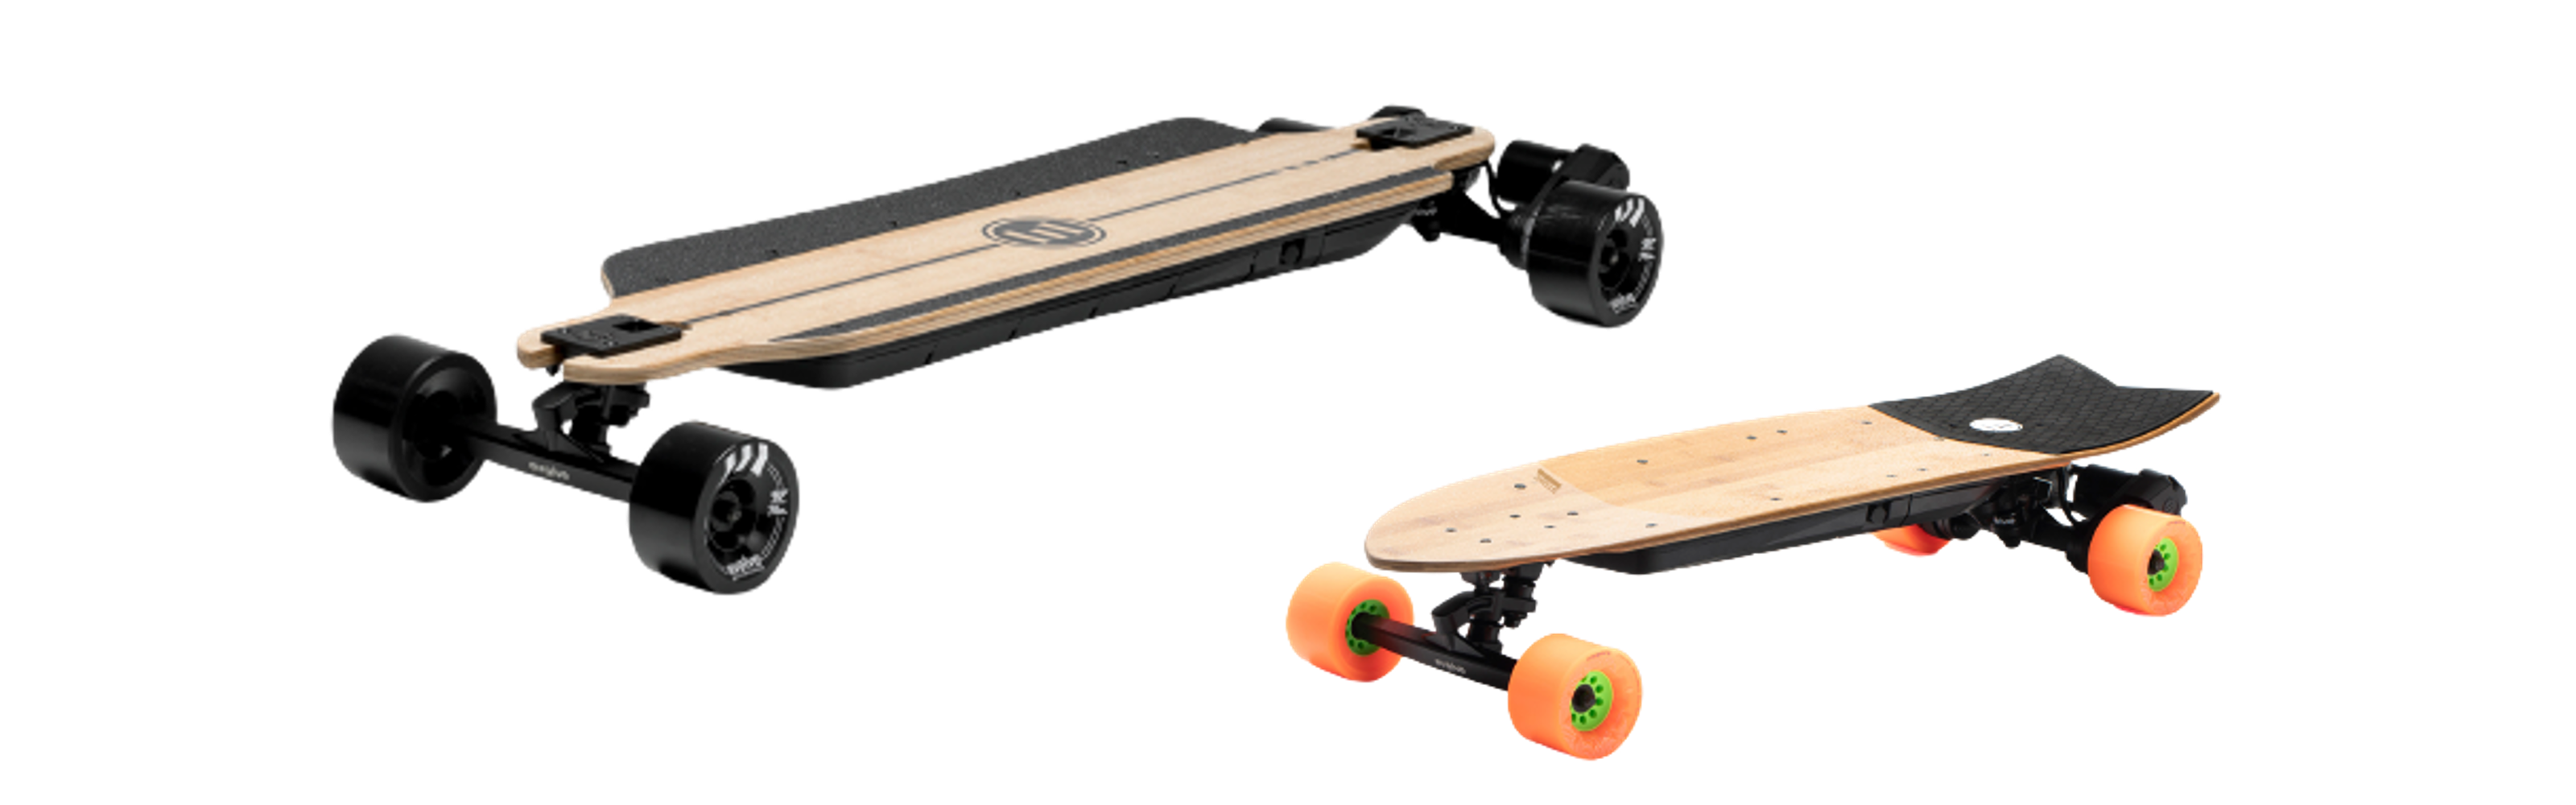 Evolved Electric Skateboard | Ride and Glide